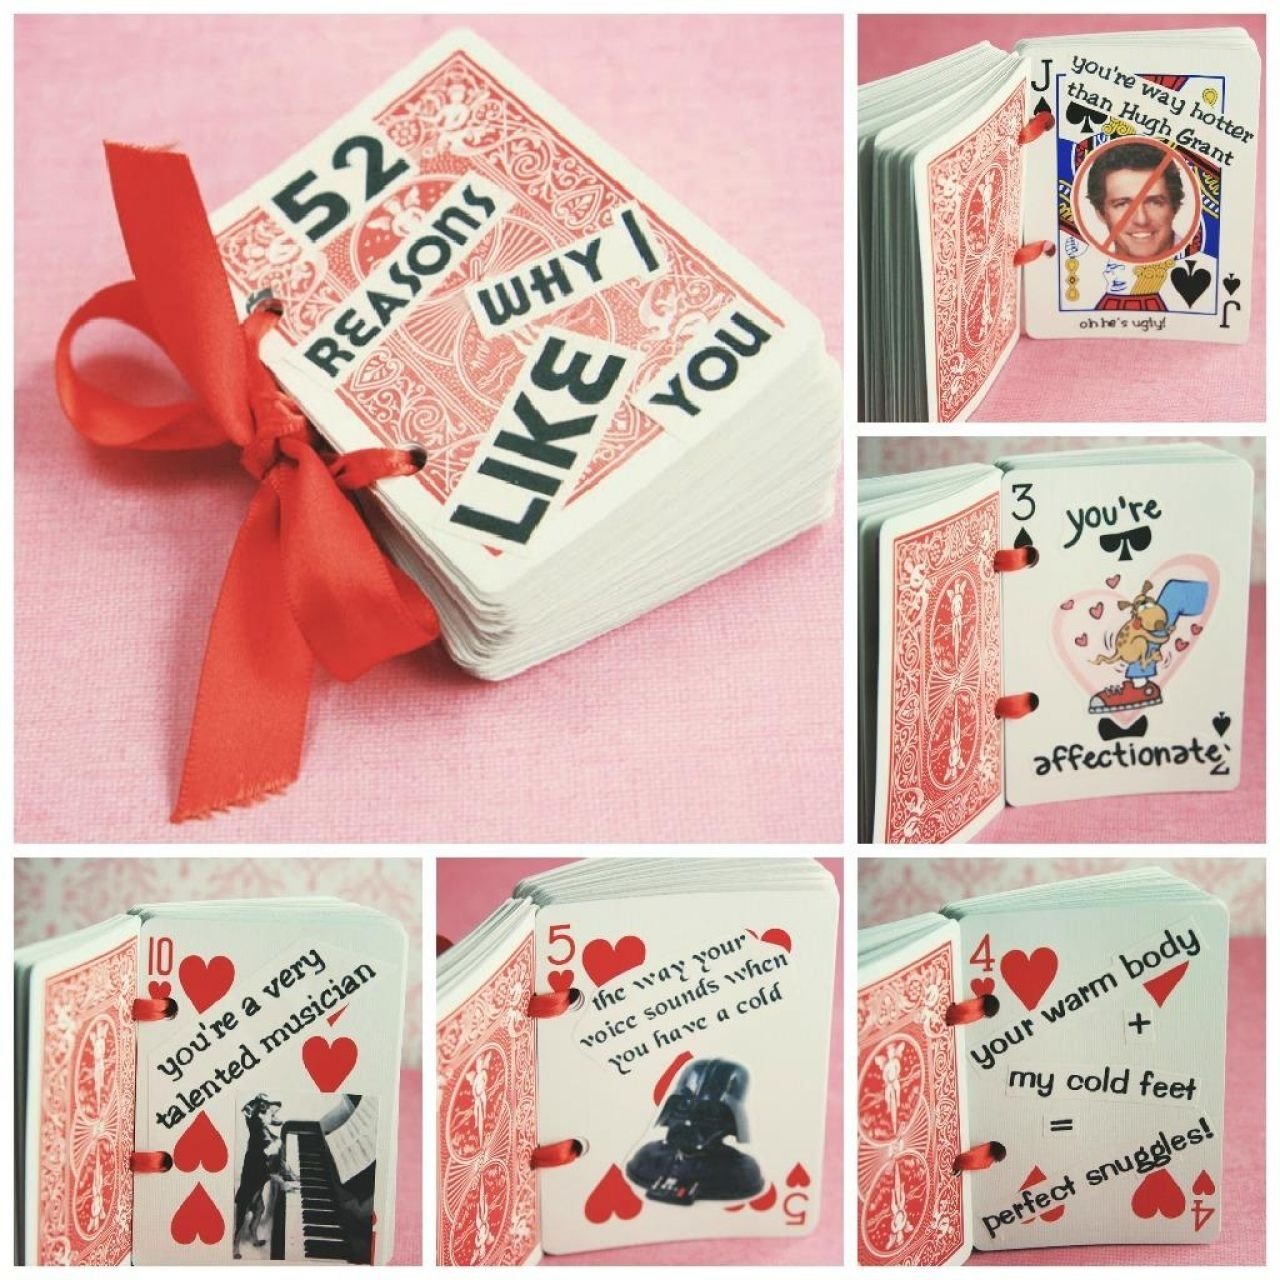 10 Lovable Valentines Gifts Ideas For Him valentines day crafts him lovely valentine gifts your dma homes 13 2022